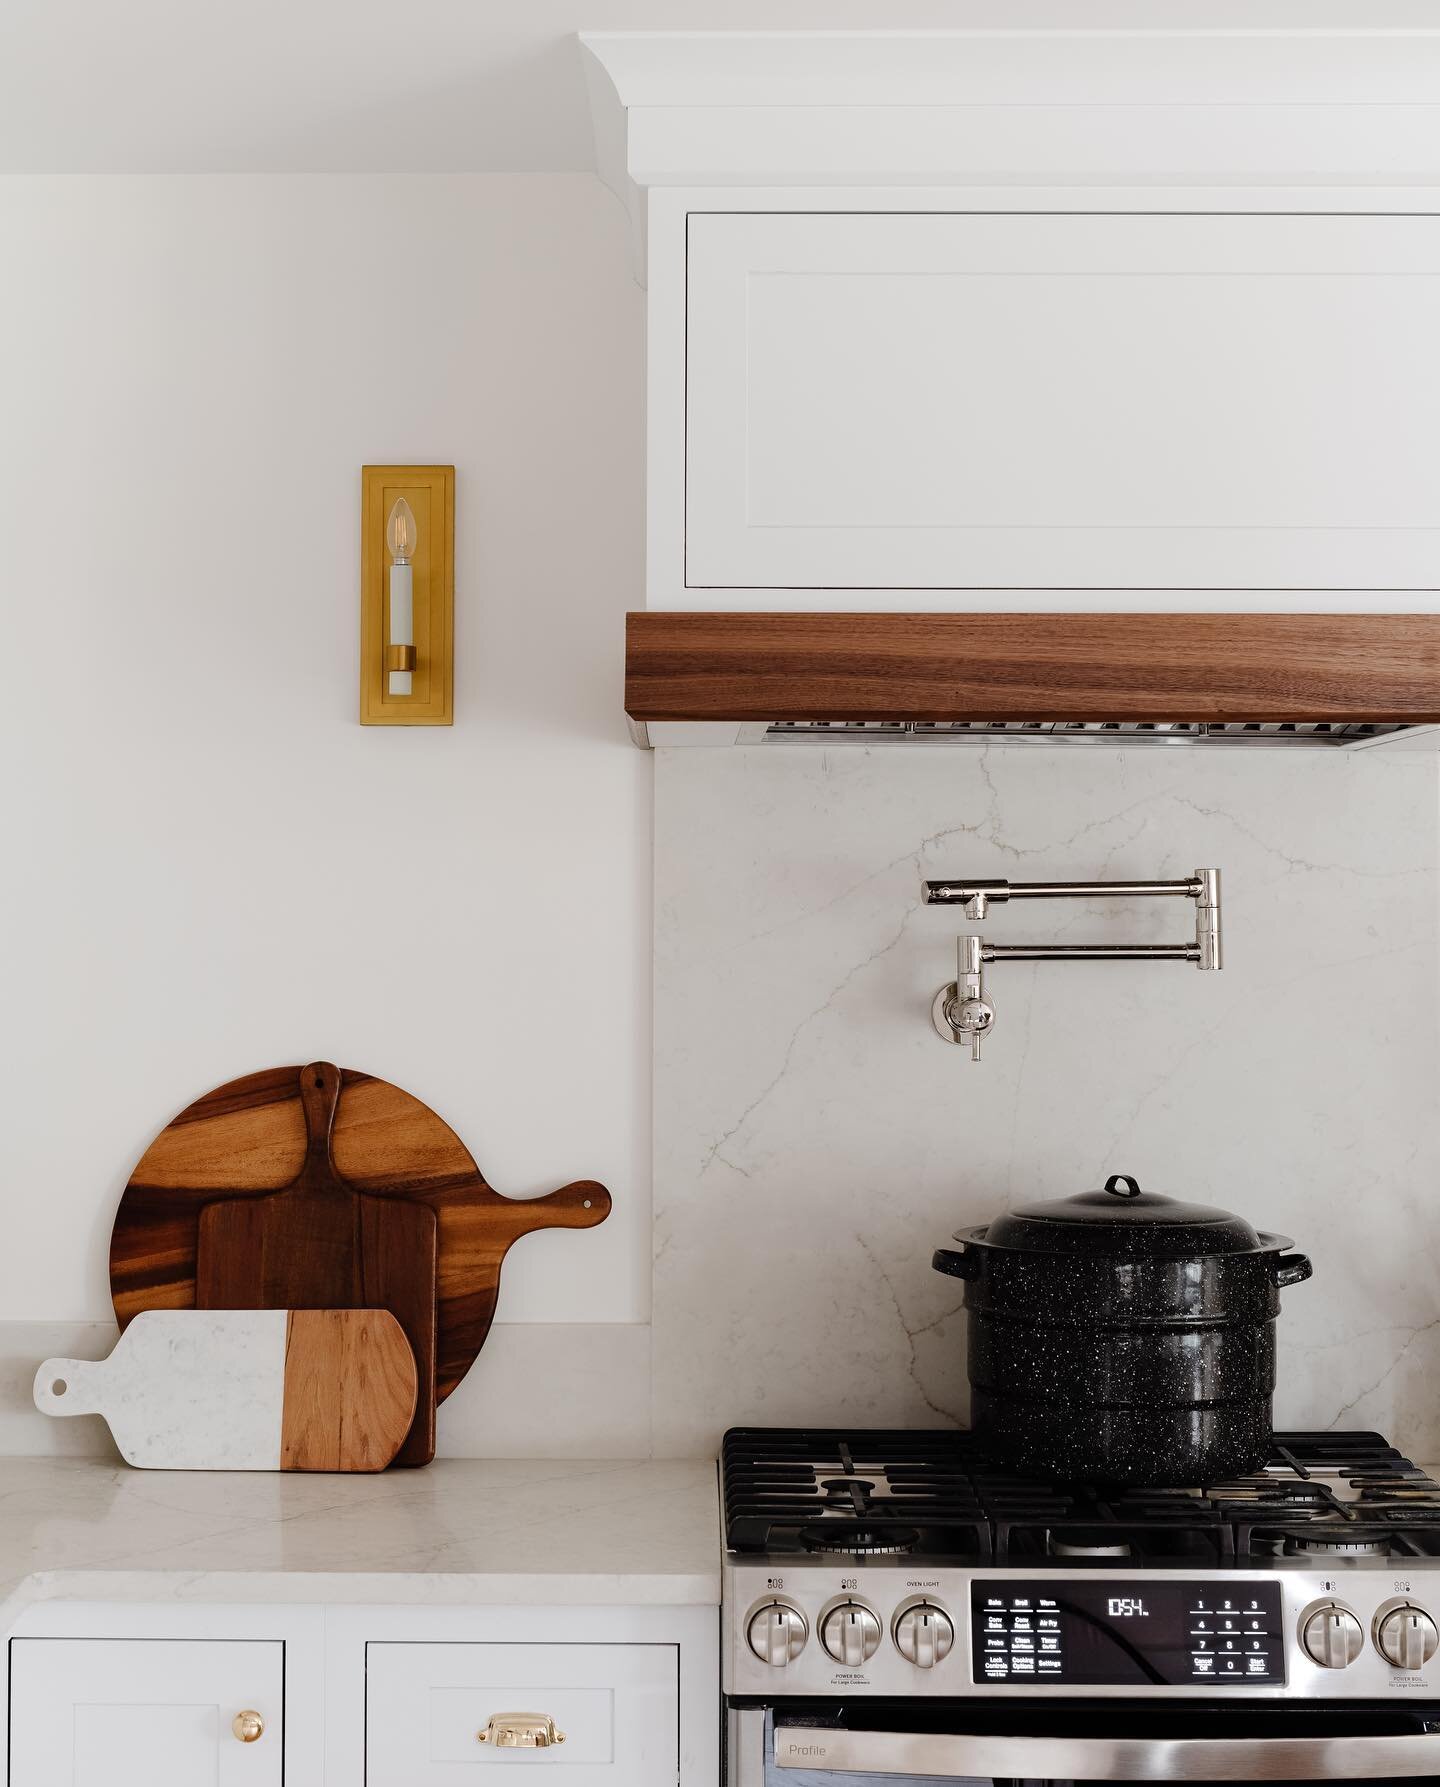 Simple can be so satisfying. We wanted this kitchen to have a paired back but sophisticated feel. We accomplished this by keeping the backsplash simple and utilizing less upper cabinetry so the hood could shine. The walnut hood detail was the perfect